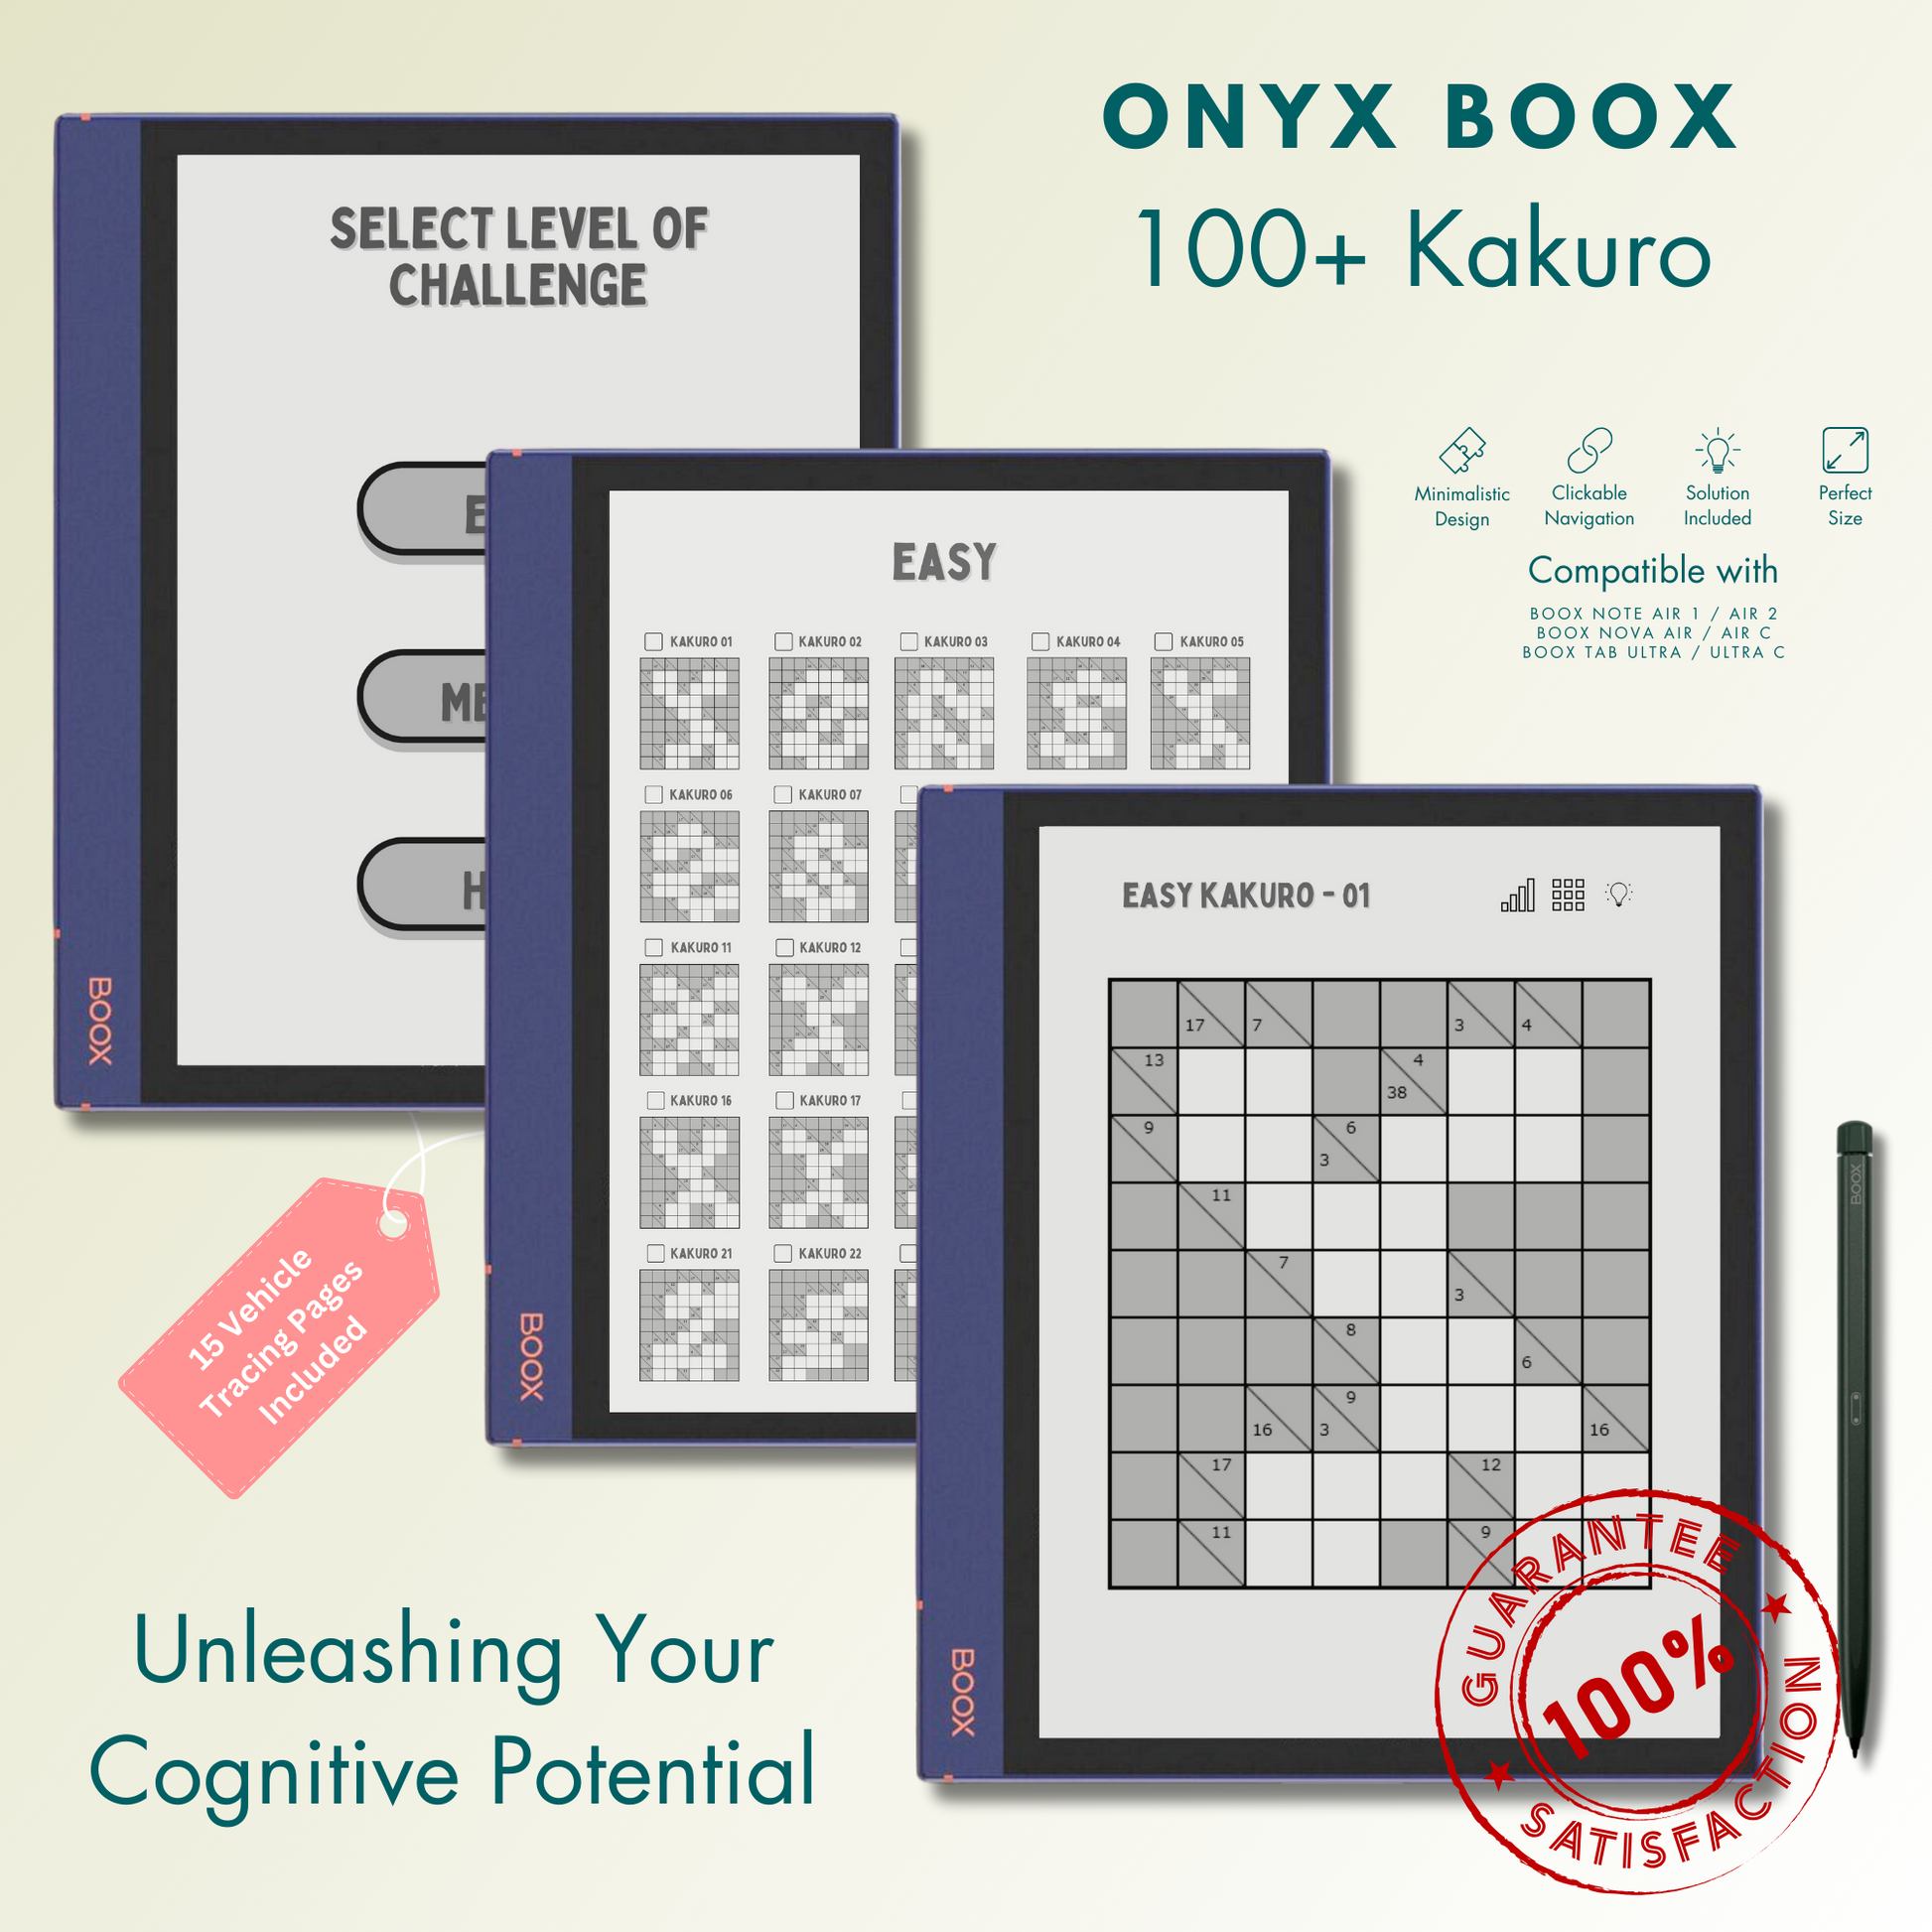 This is a Digital Download of 100+ Kakuro Puzzles in 3 different levels tailored for Onyx Boox. Compatible with Boox Note Air 1, Boox Note Air 2, Boox Note Air Plus, Boox Nova Air, Boox Nova Air C, Boox Tab Ultra and Boox Tab Ultra C.